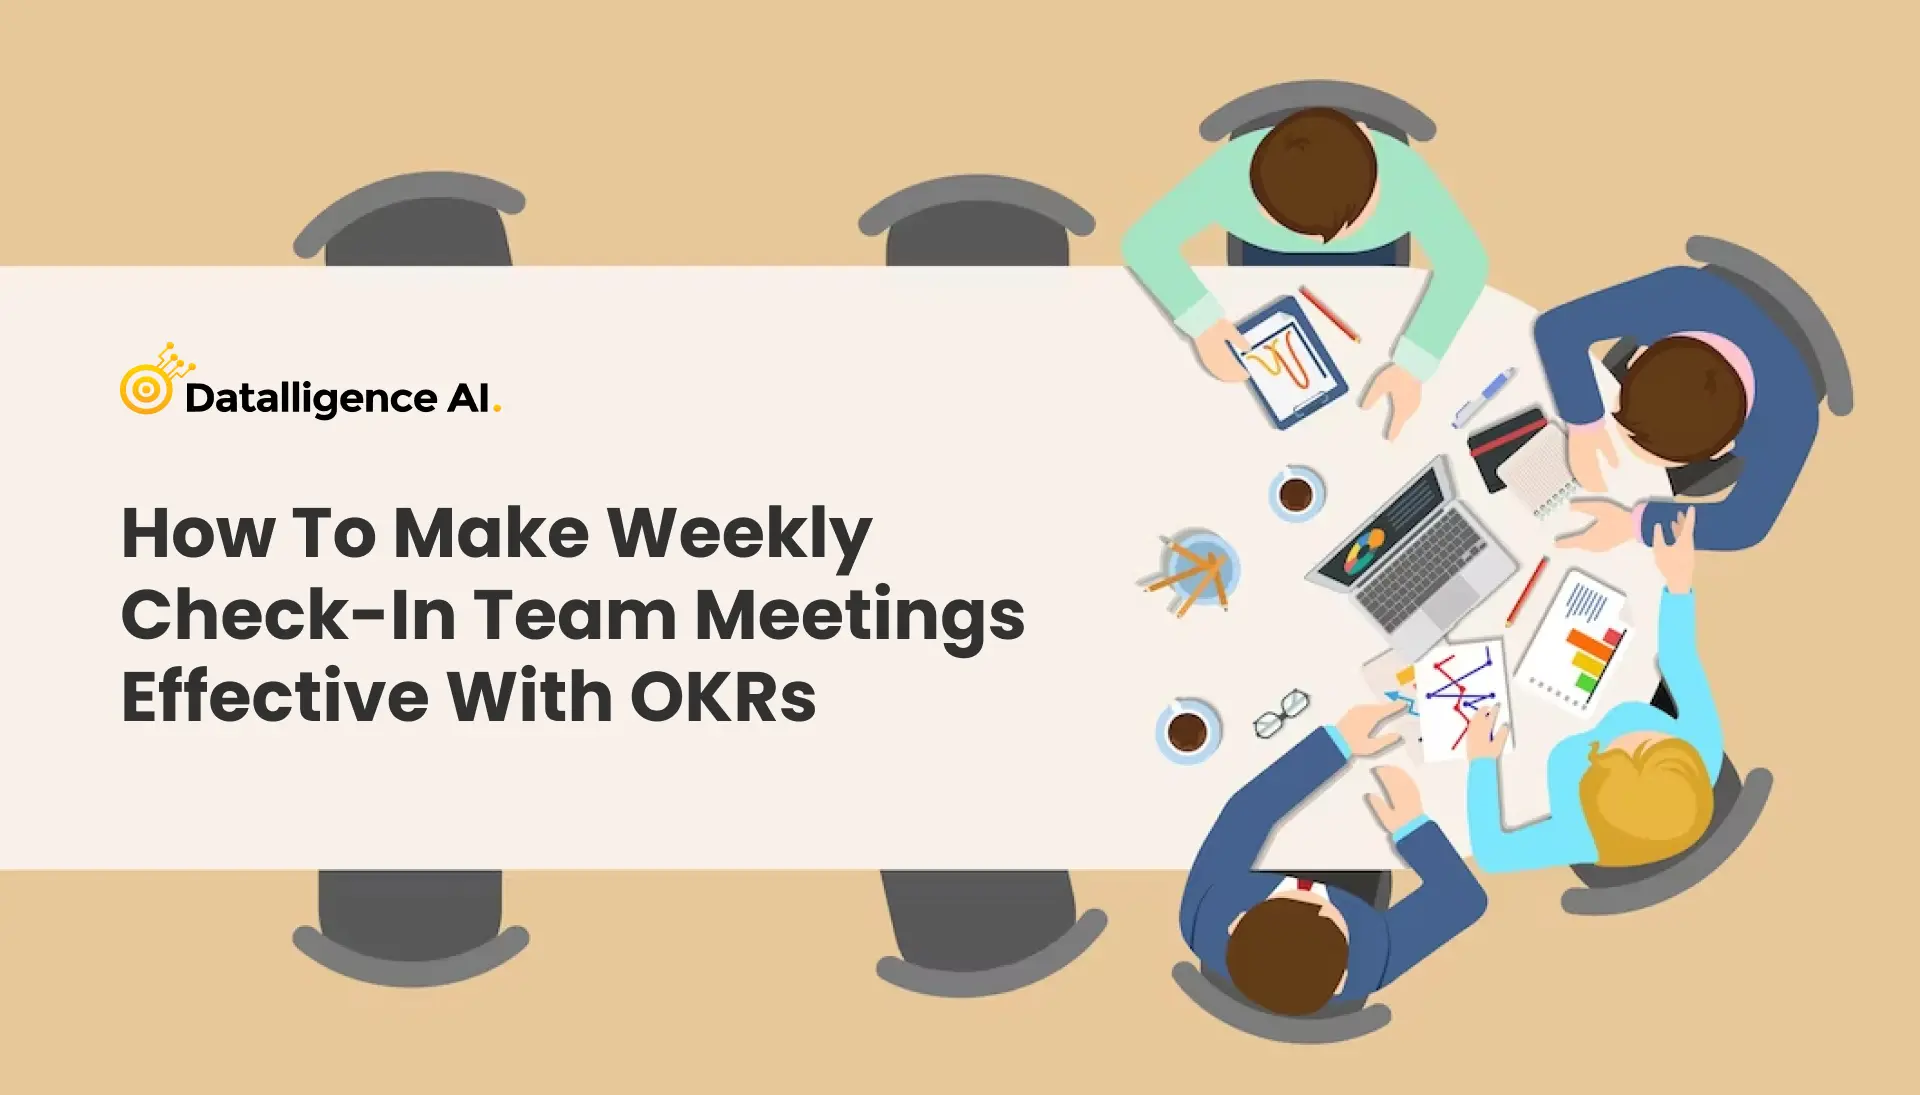 How to Make Weekly Check-in Team Meetings Effective with OKRs